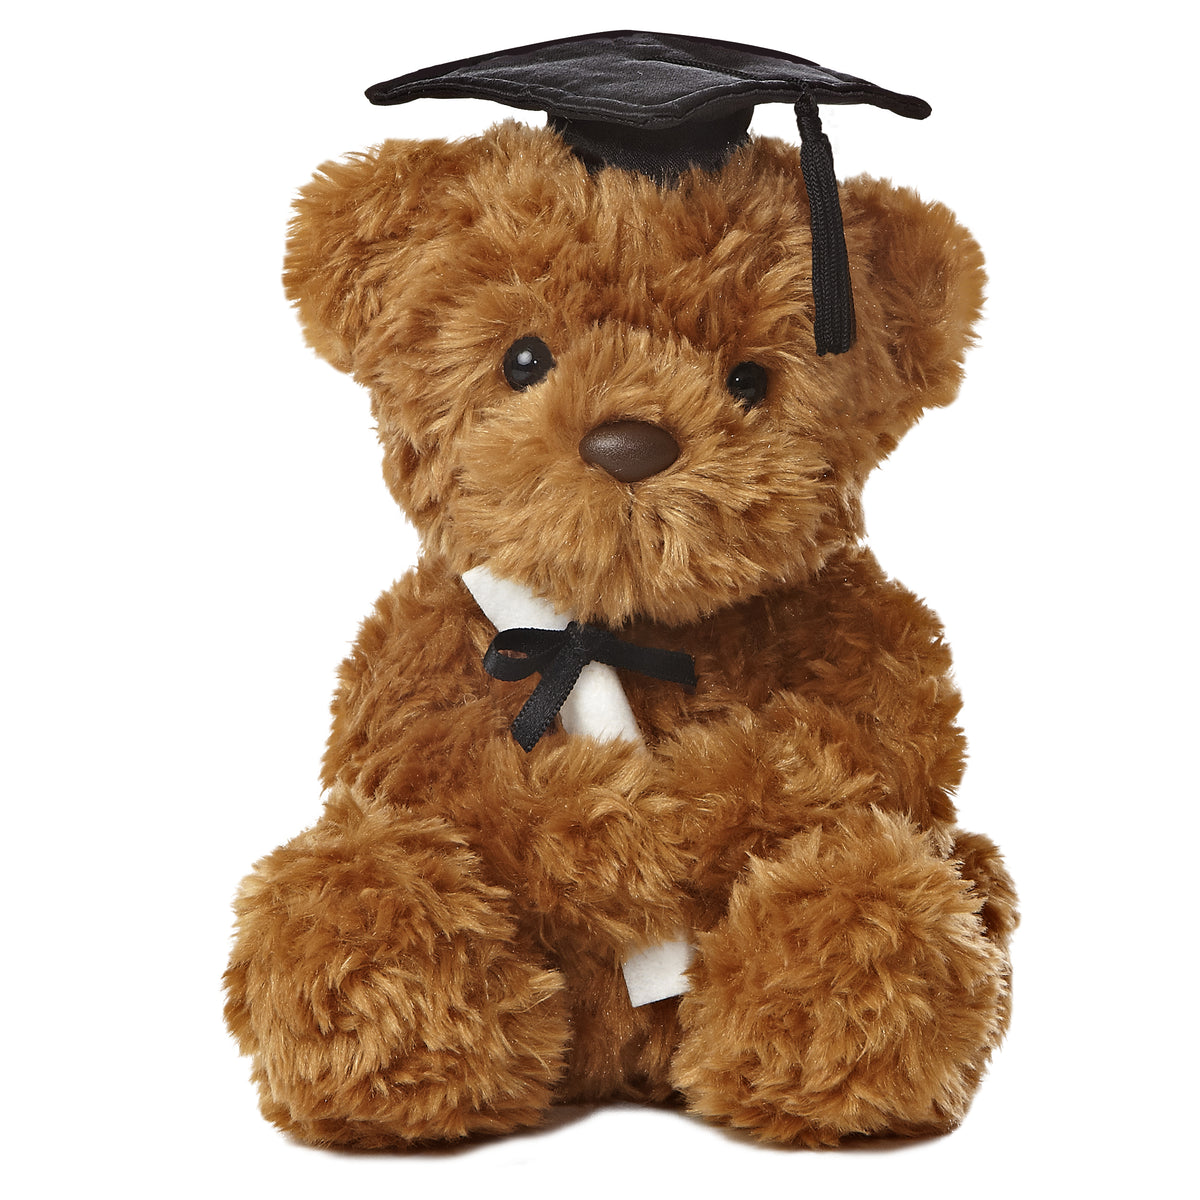 Wagner Bear from Aurora Plush Graduation, in soft brown with a black graduation cap, symbolizing achievement